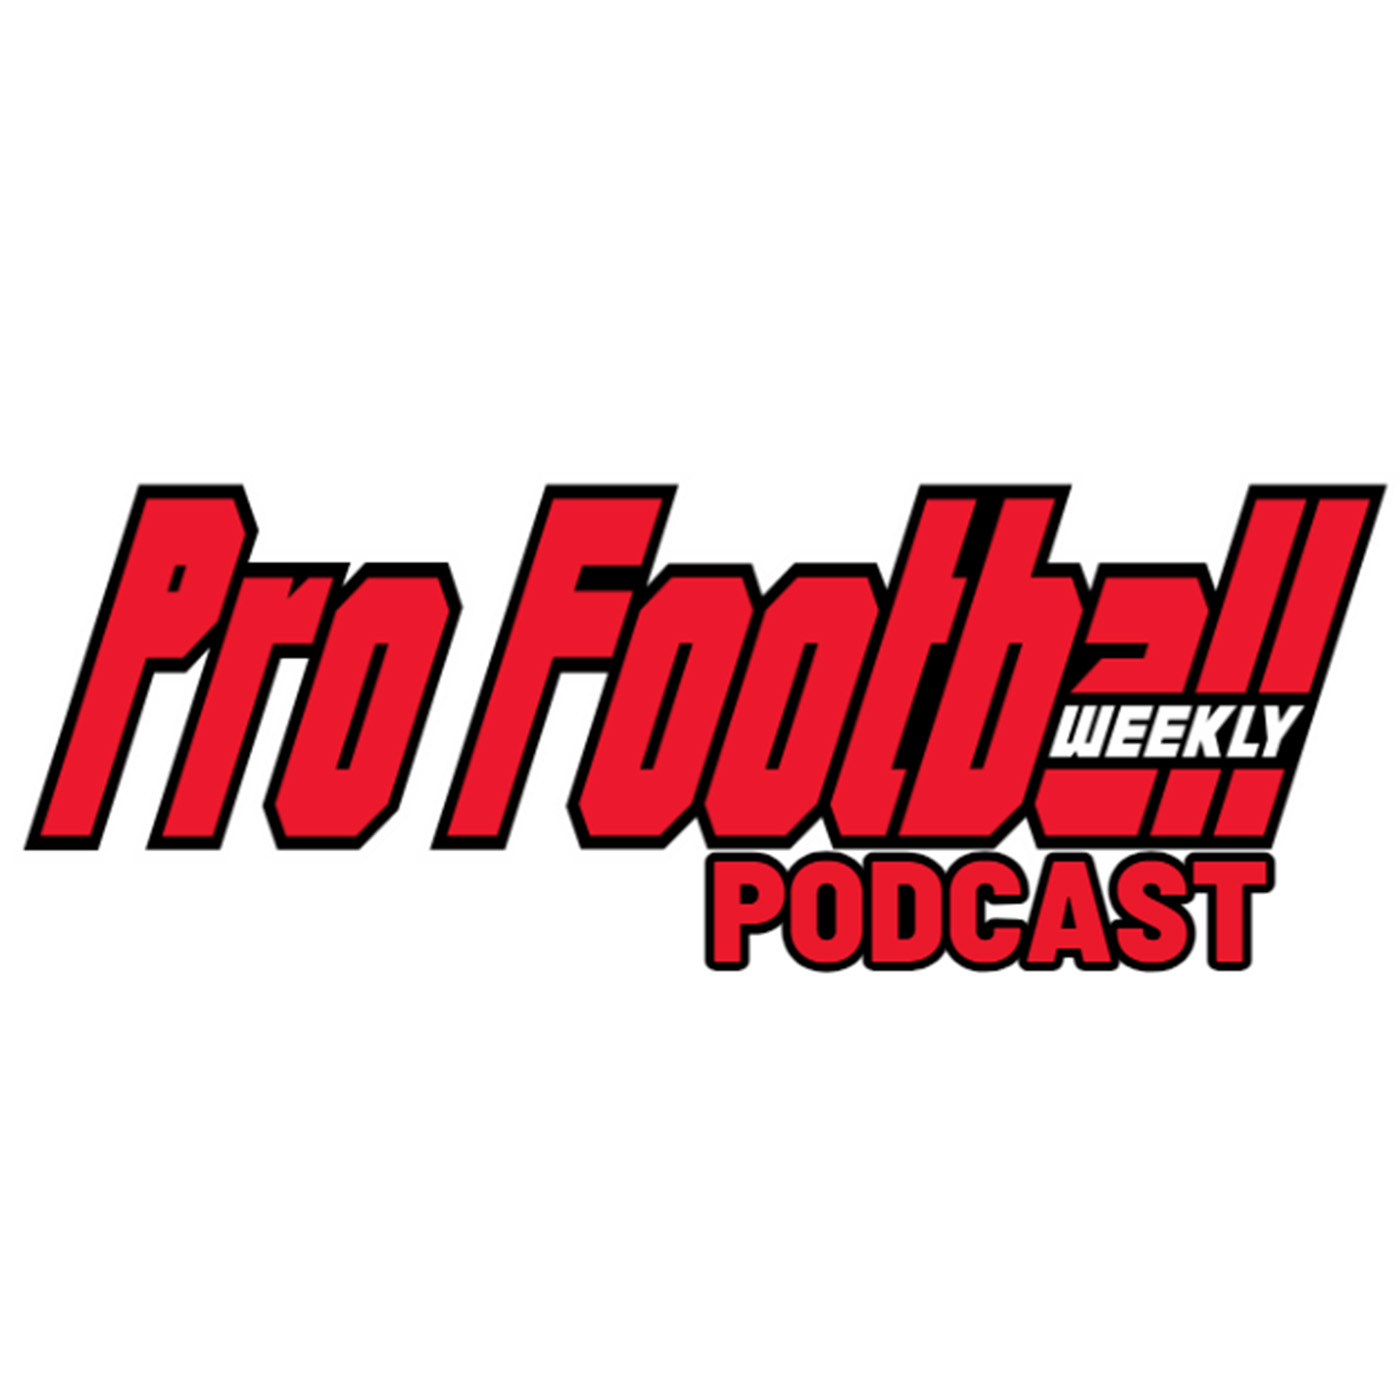 Artwork for Pro football weekly TV